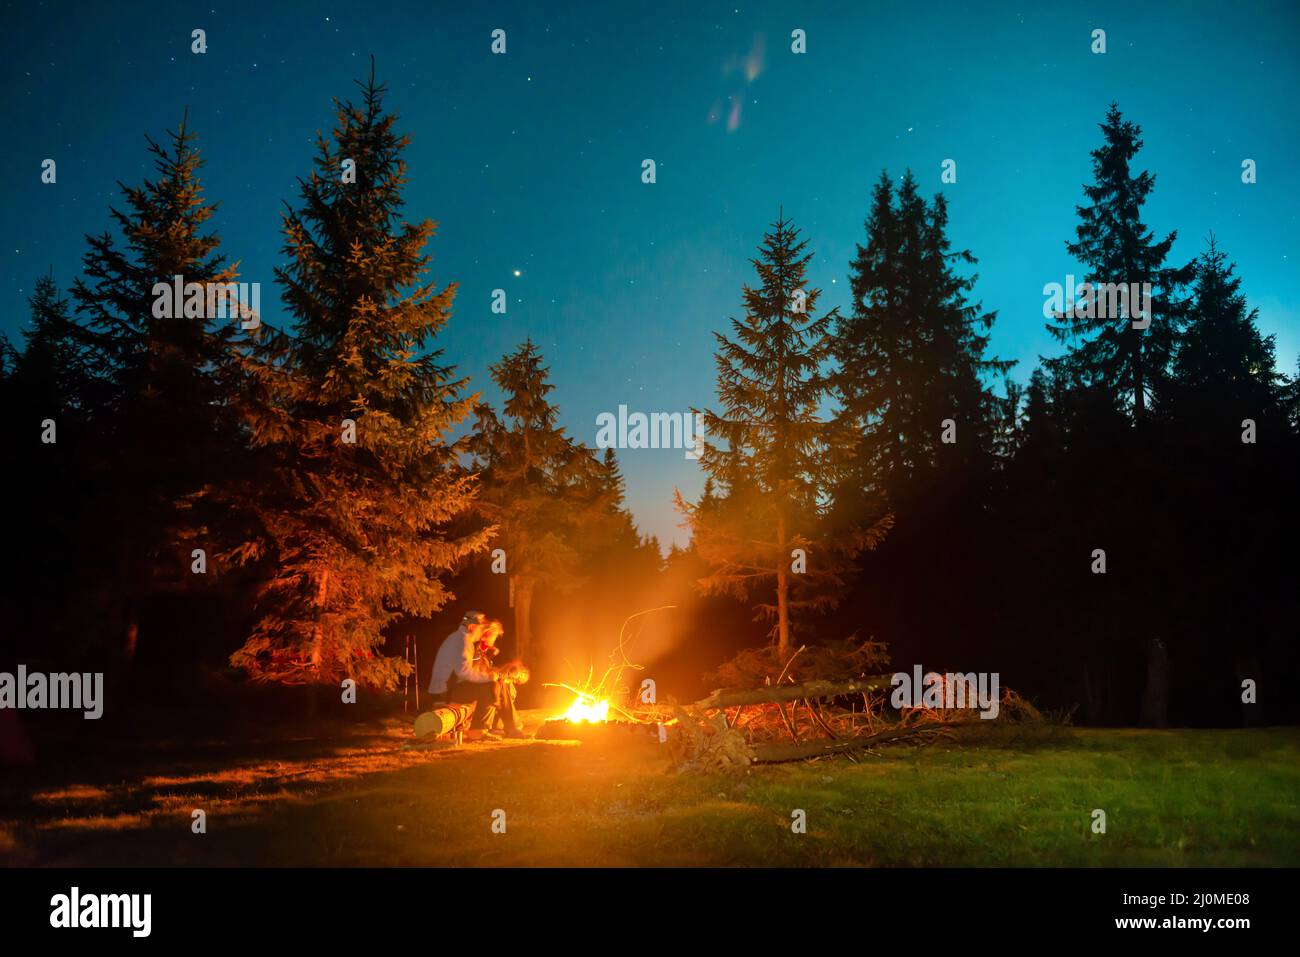 Bonfire in night forest with people Stock Photo